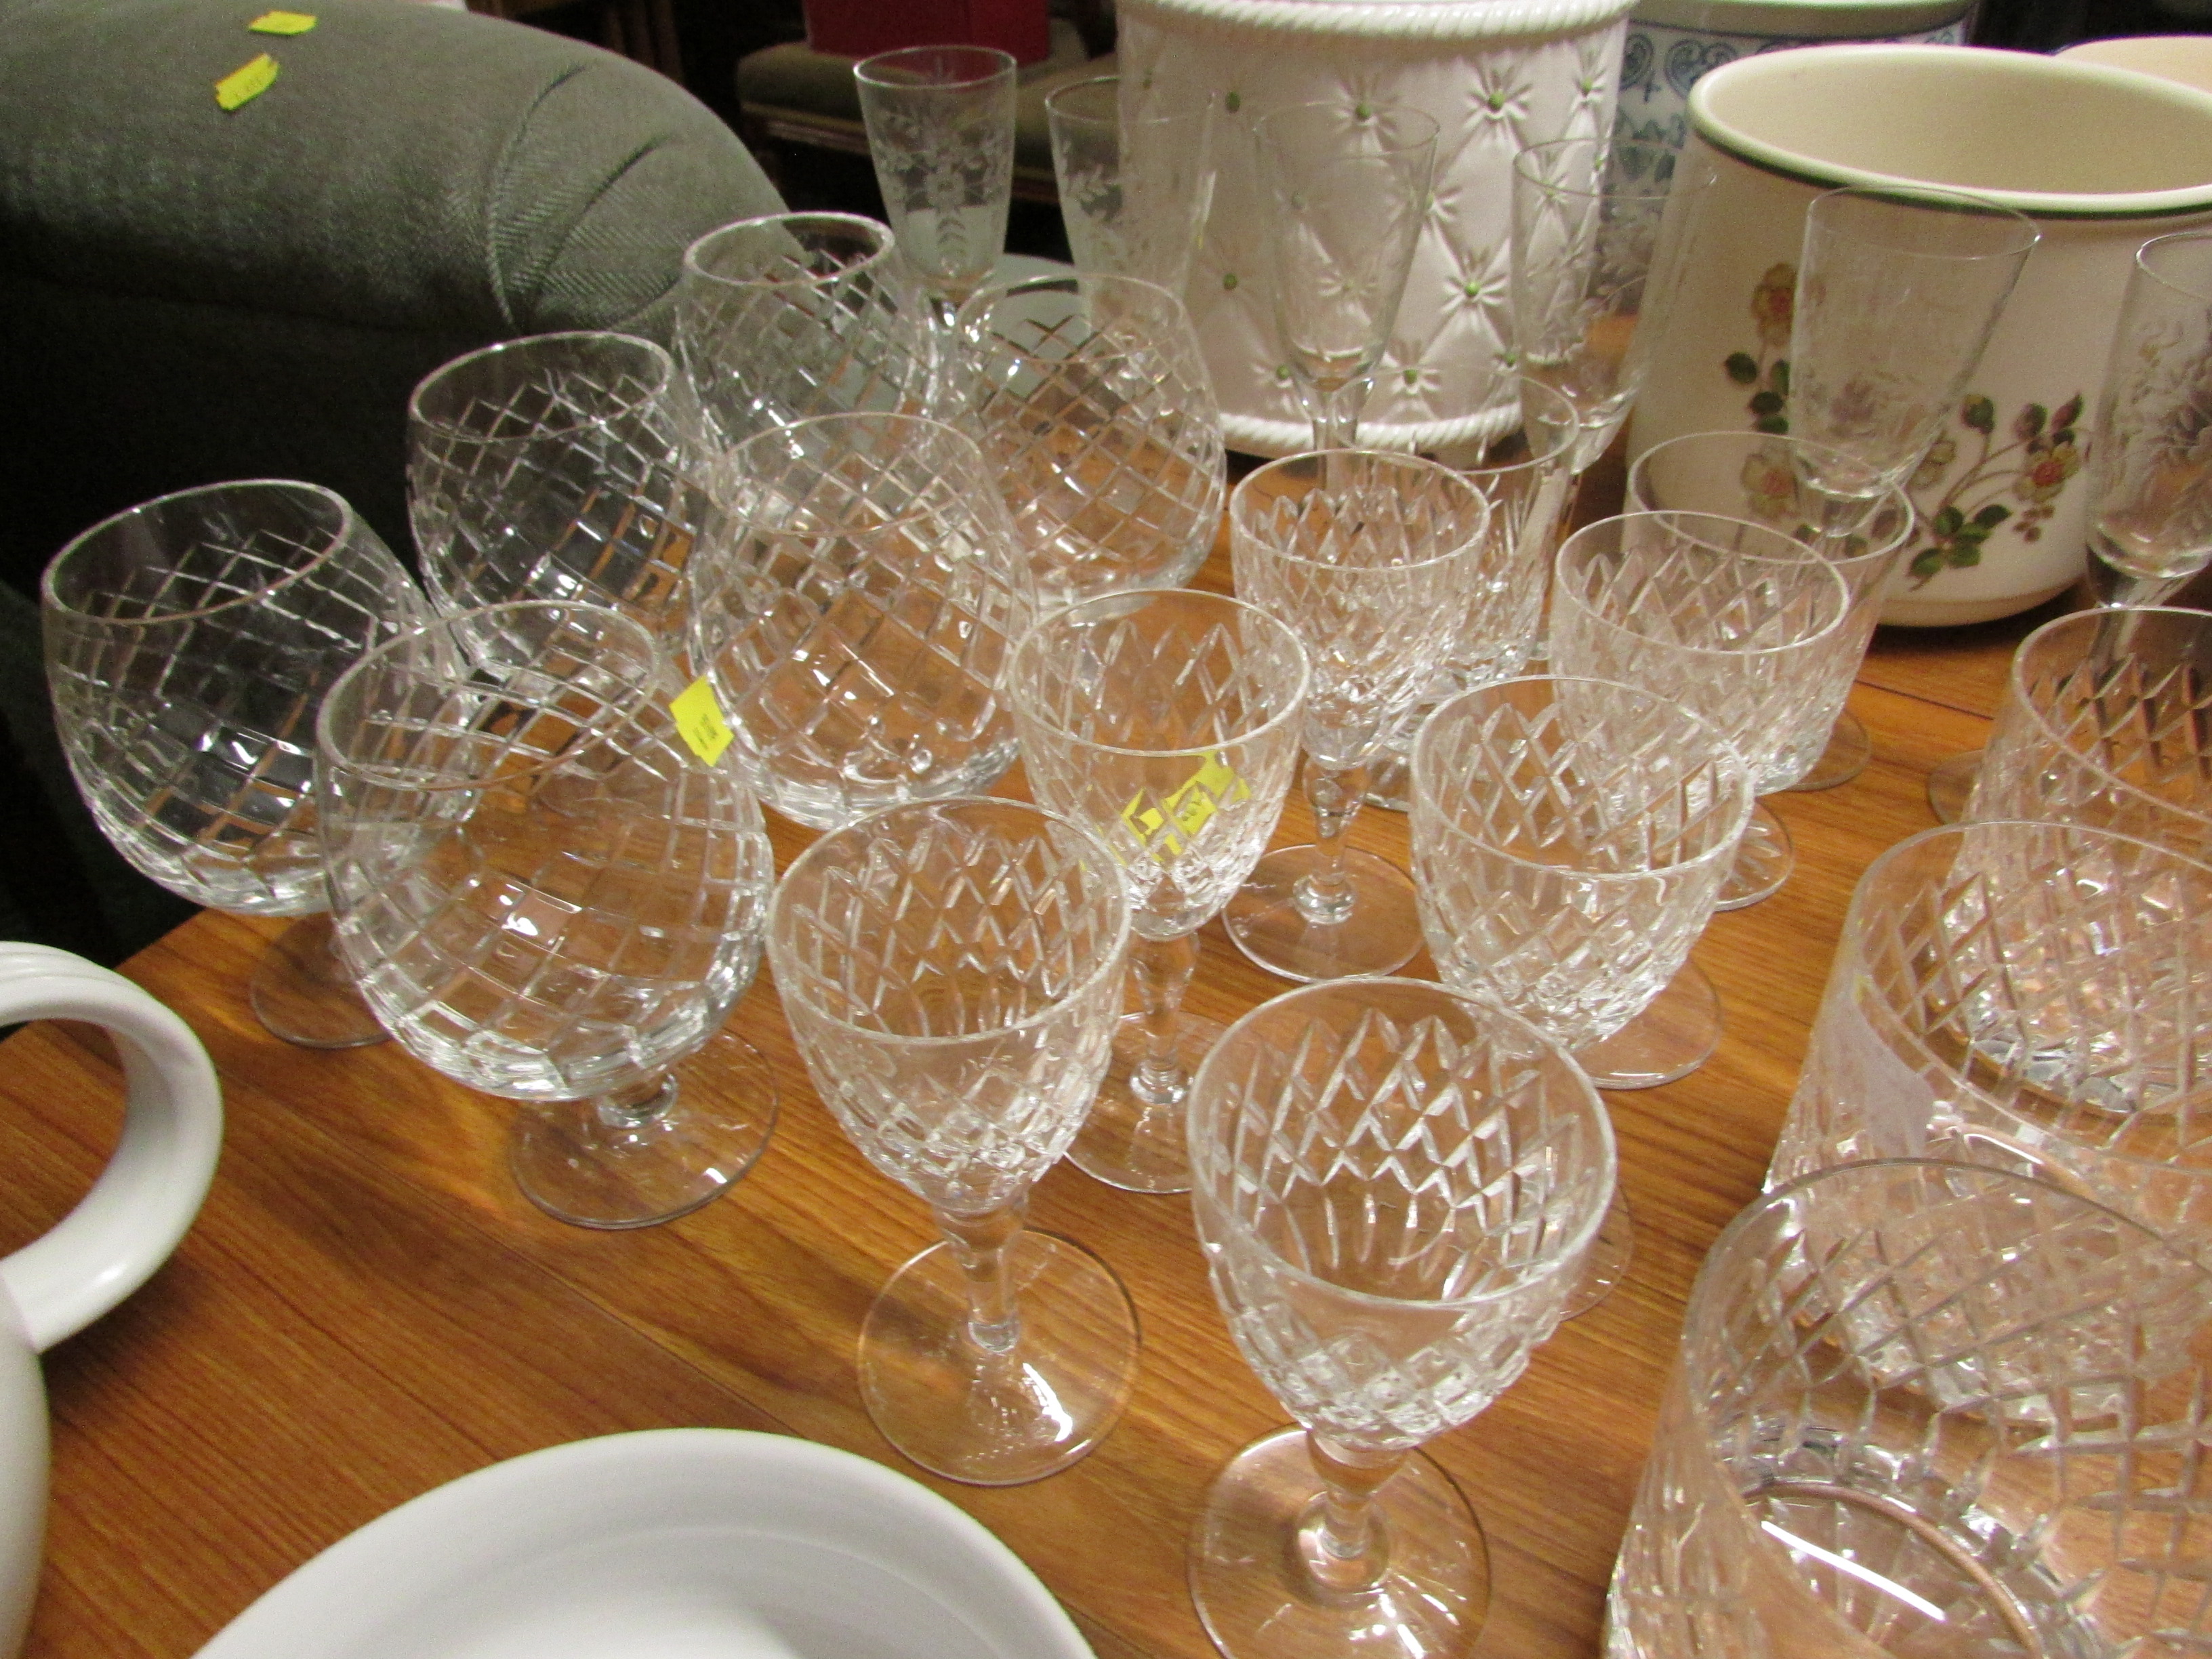 CUT GLASS DRINKING GLASSES INCLUDING ROYAL BRIERLEY BRANDY GLASSES, TUMBLERS AND SMALL WINE GLASSES - Image 2 of 4